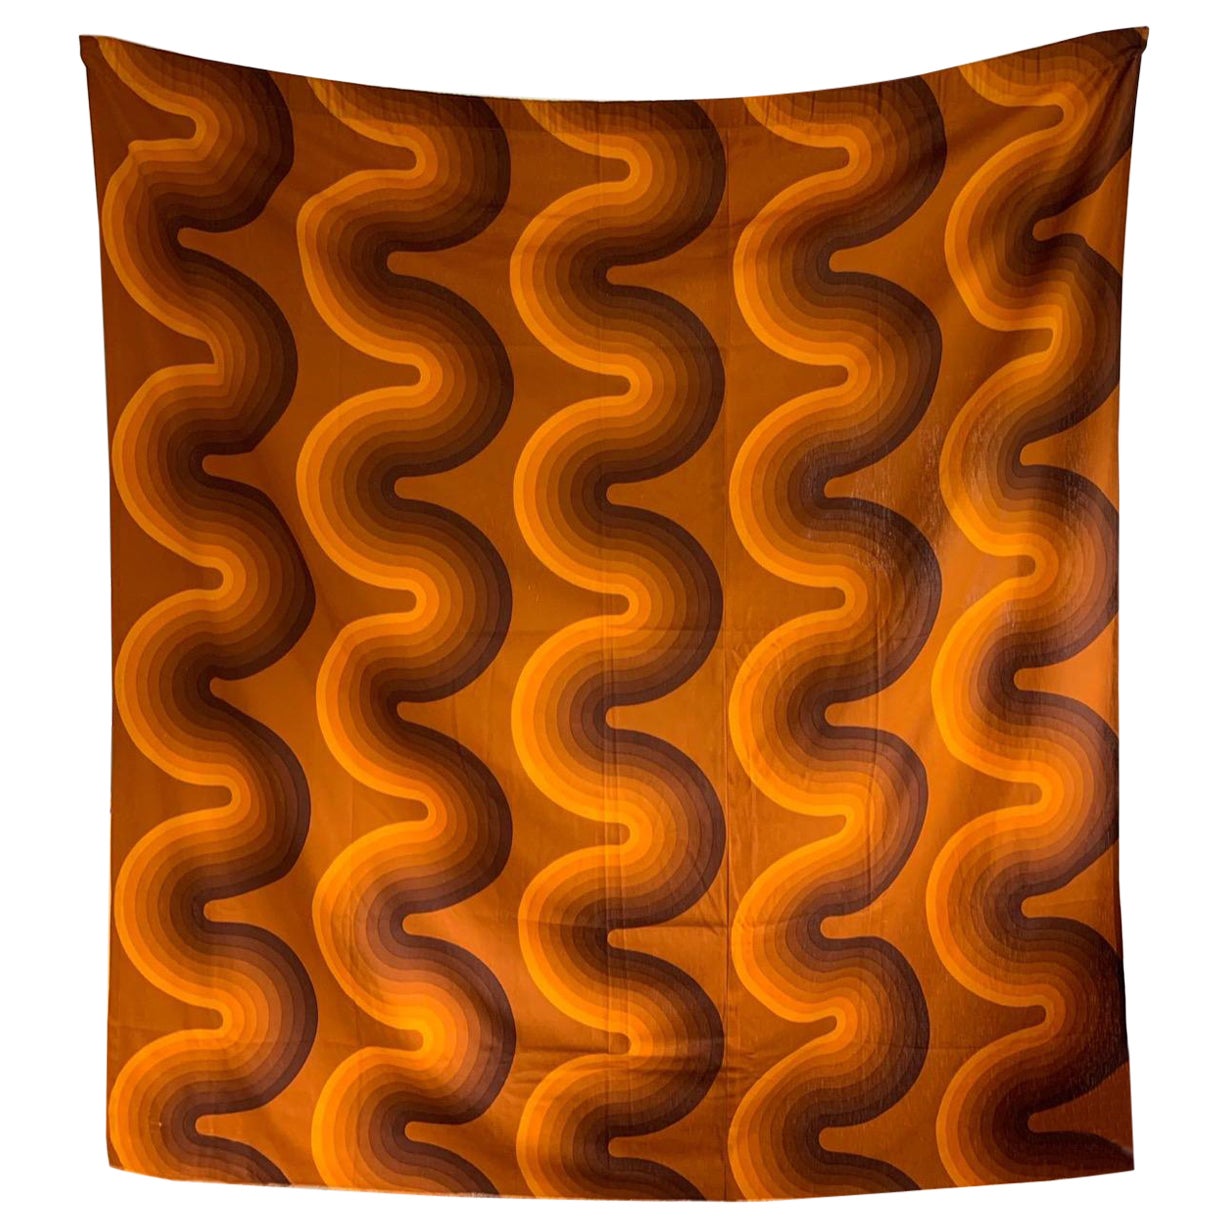 Verner Panton ‘Curve’ Textile for Swiss Mira-X, 1970s For Sale